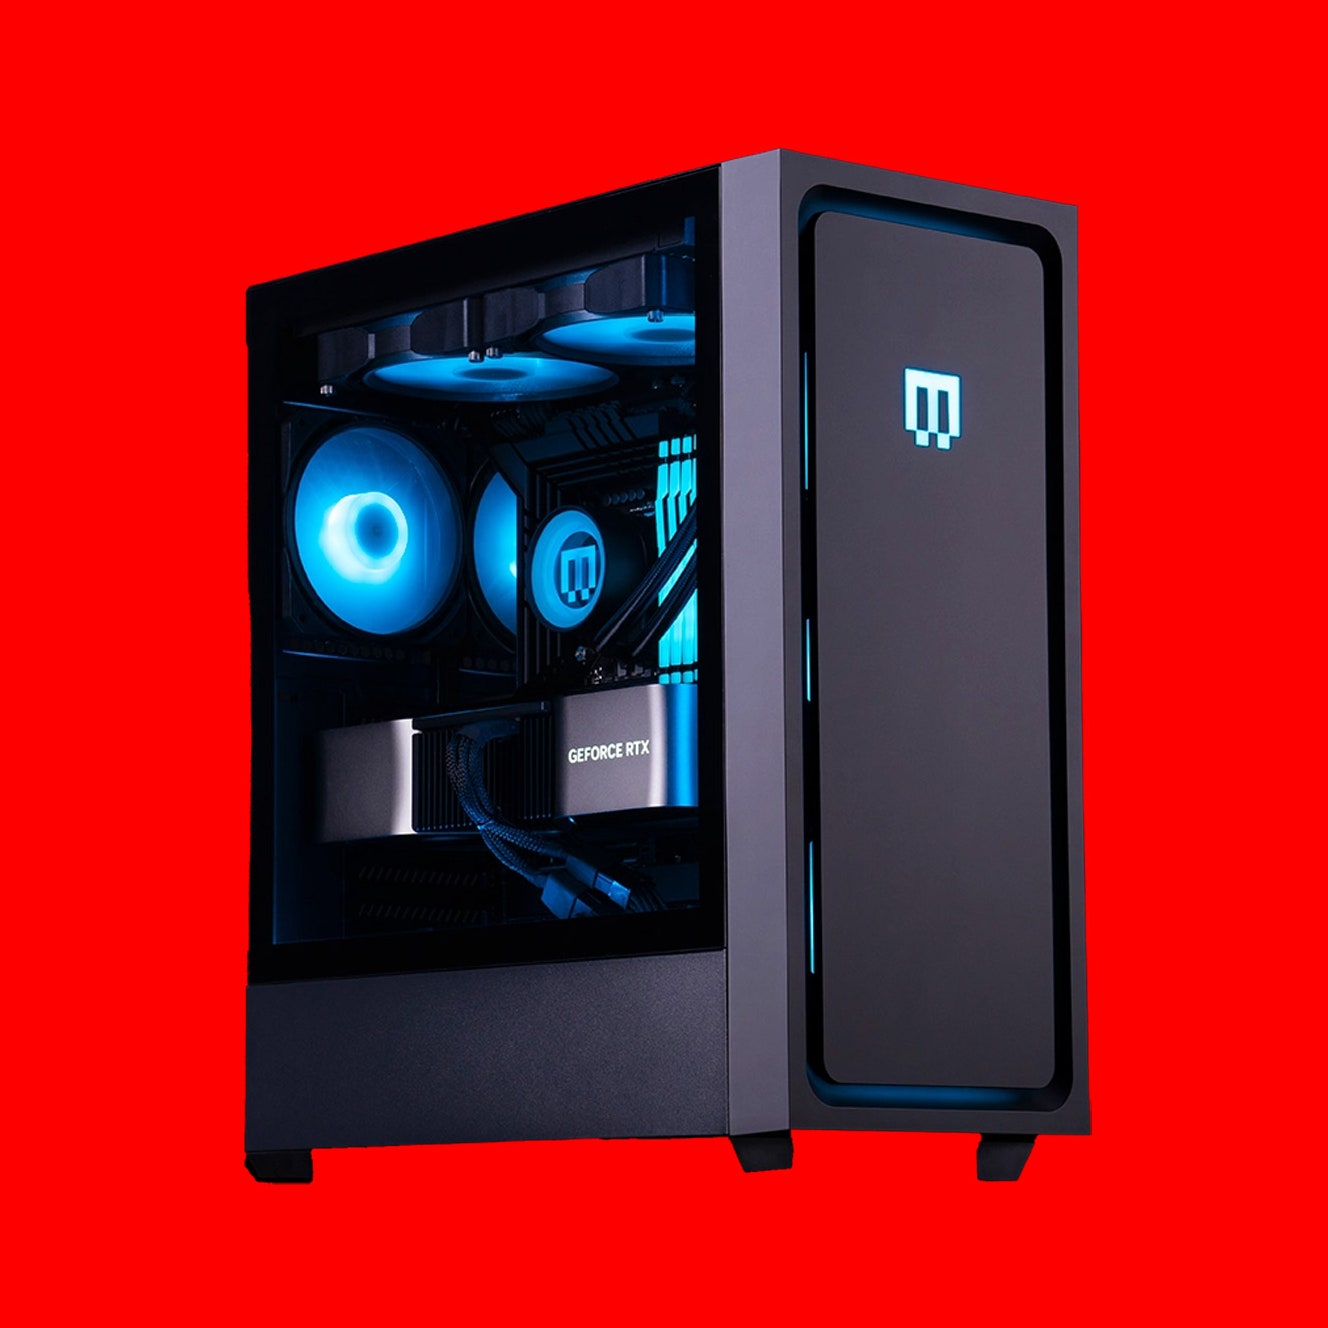 The Maingear MG-1 Is the Perfect Starter Custom Gaming PC